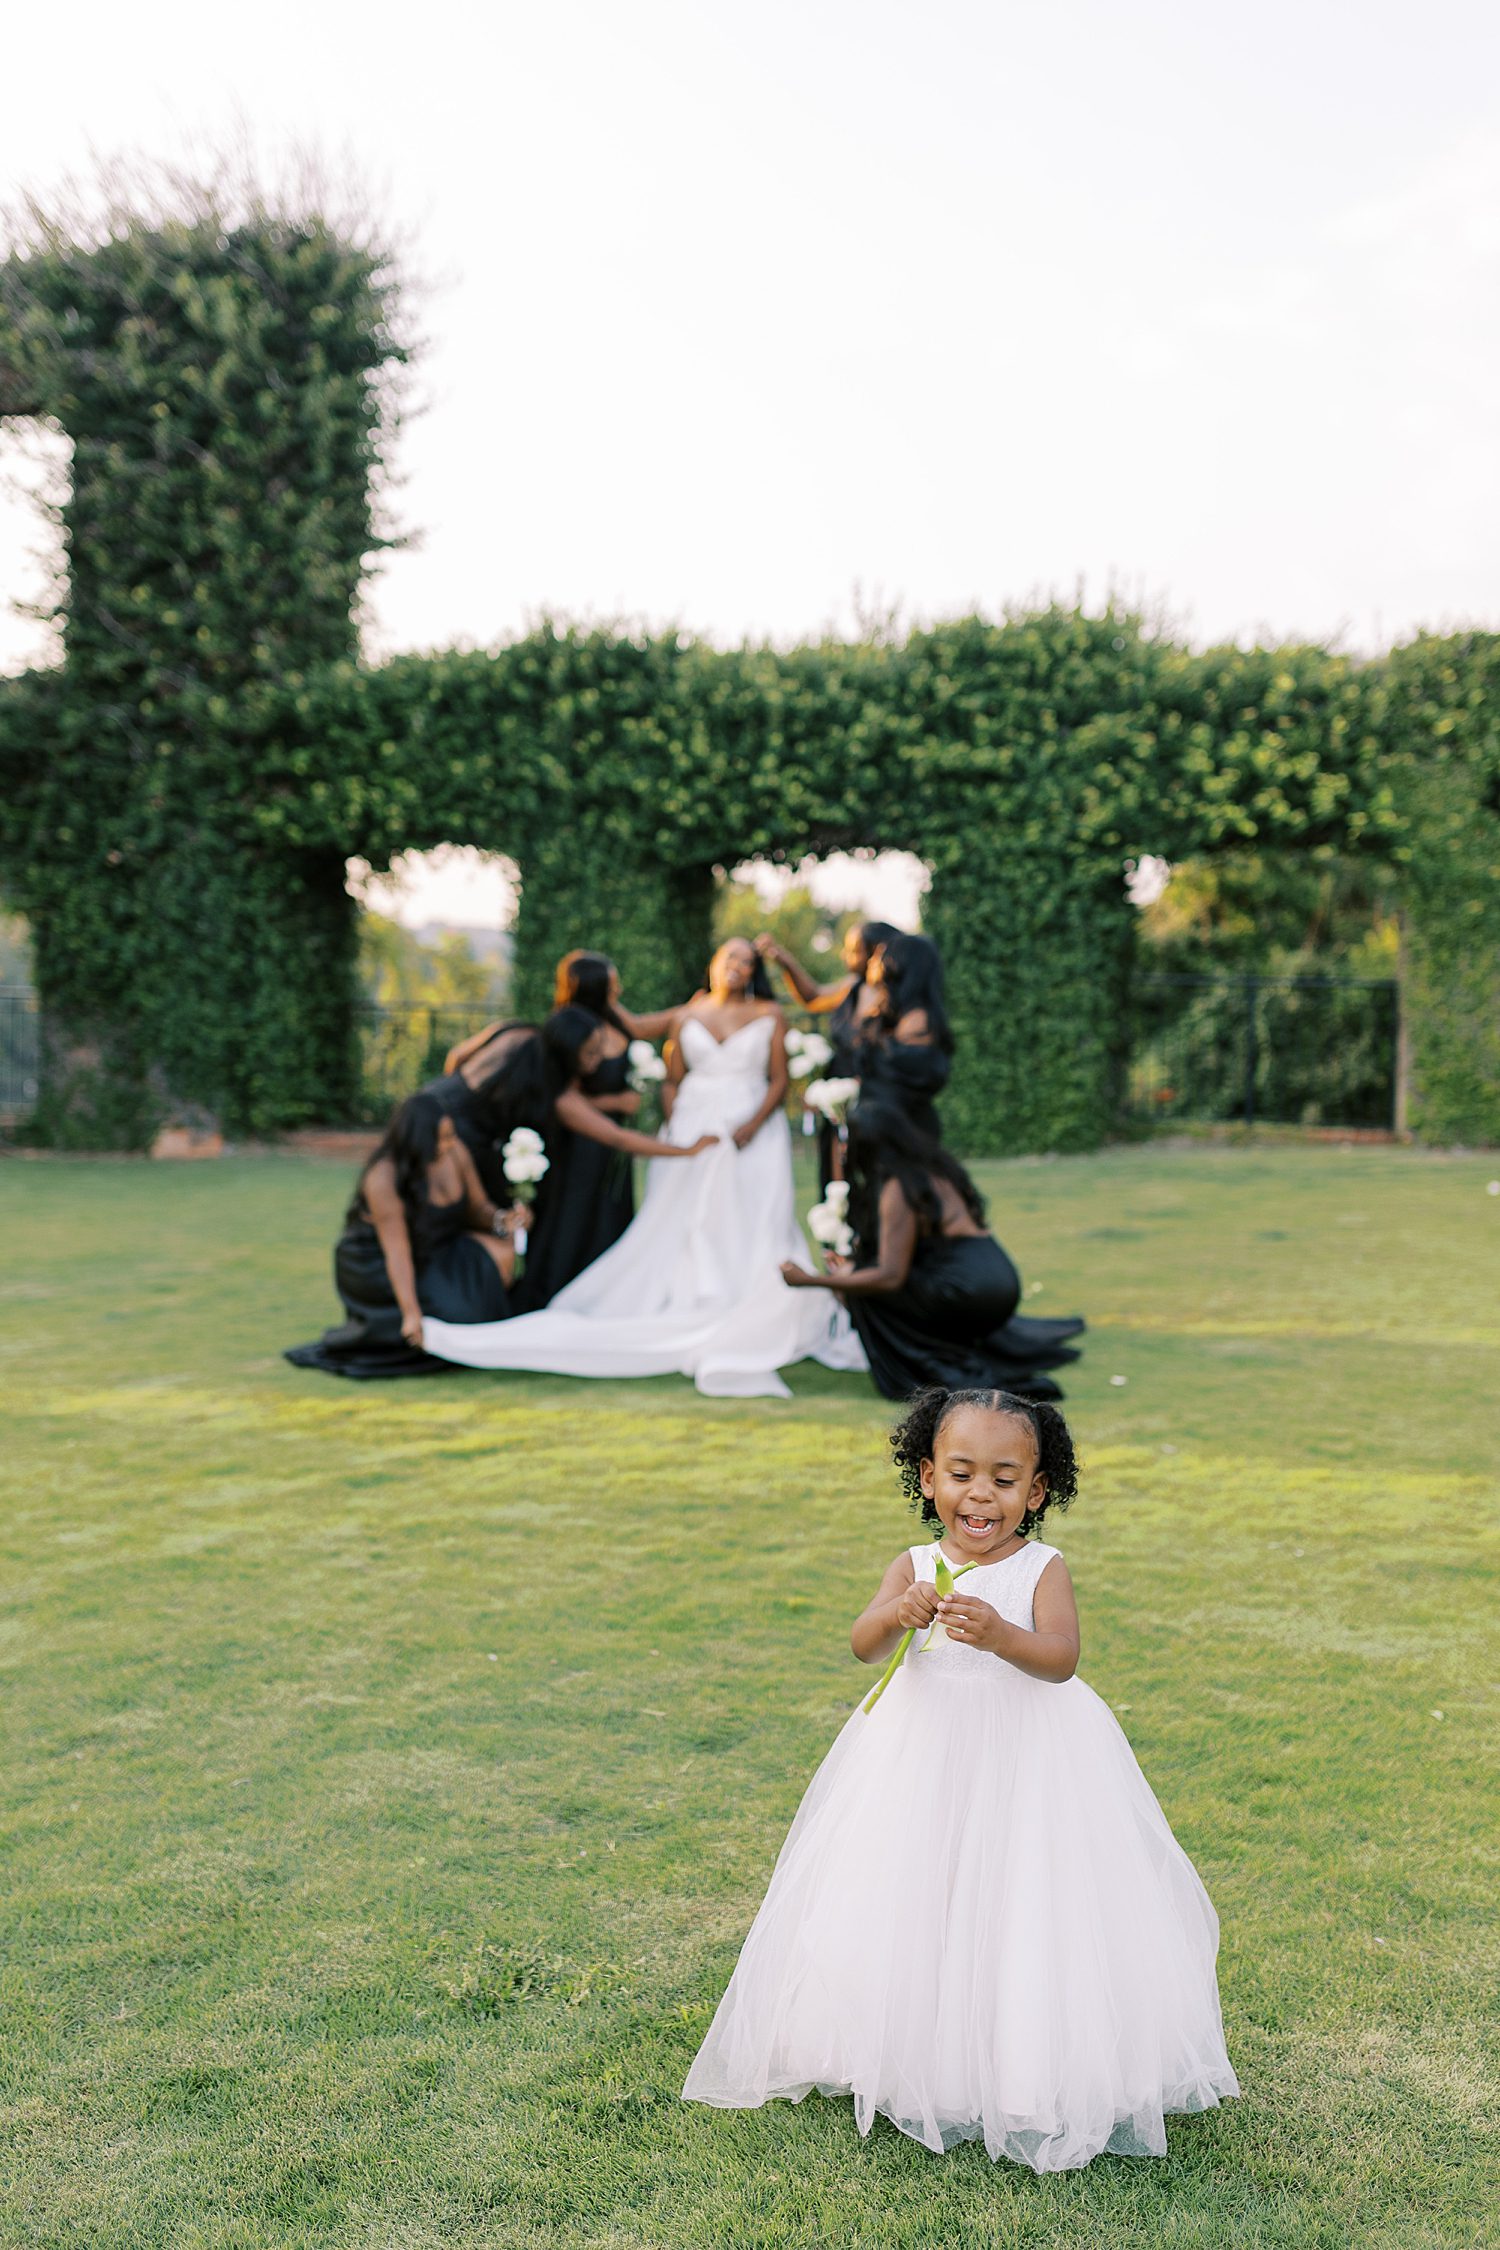 flower girl in white dress walks in front of bride and bridesmaids in black gowns